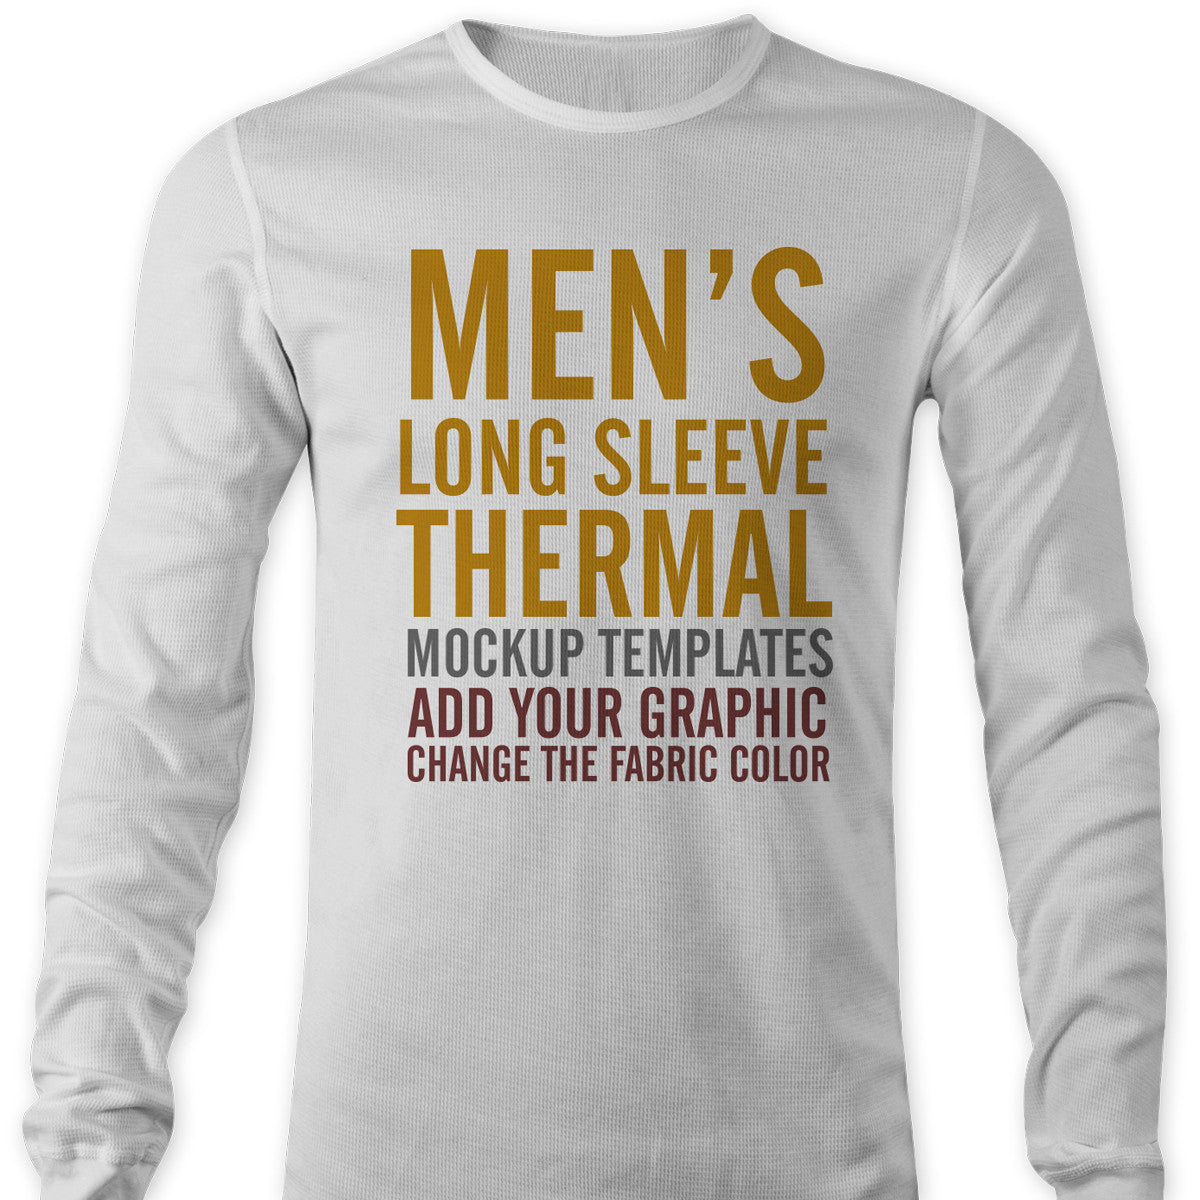 Download Men's Thermal Mockup Templates - TheVectorLab